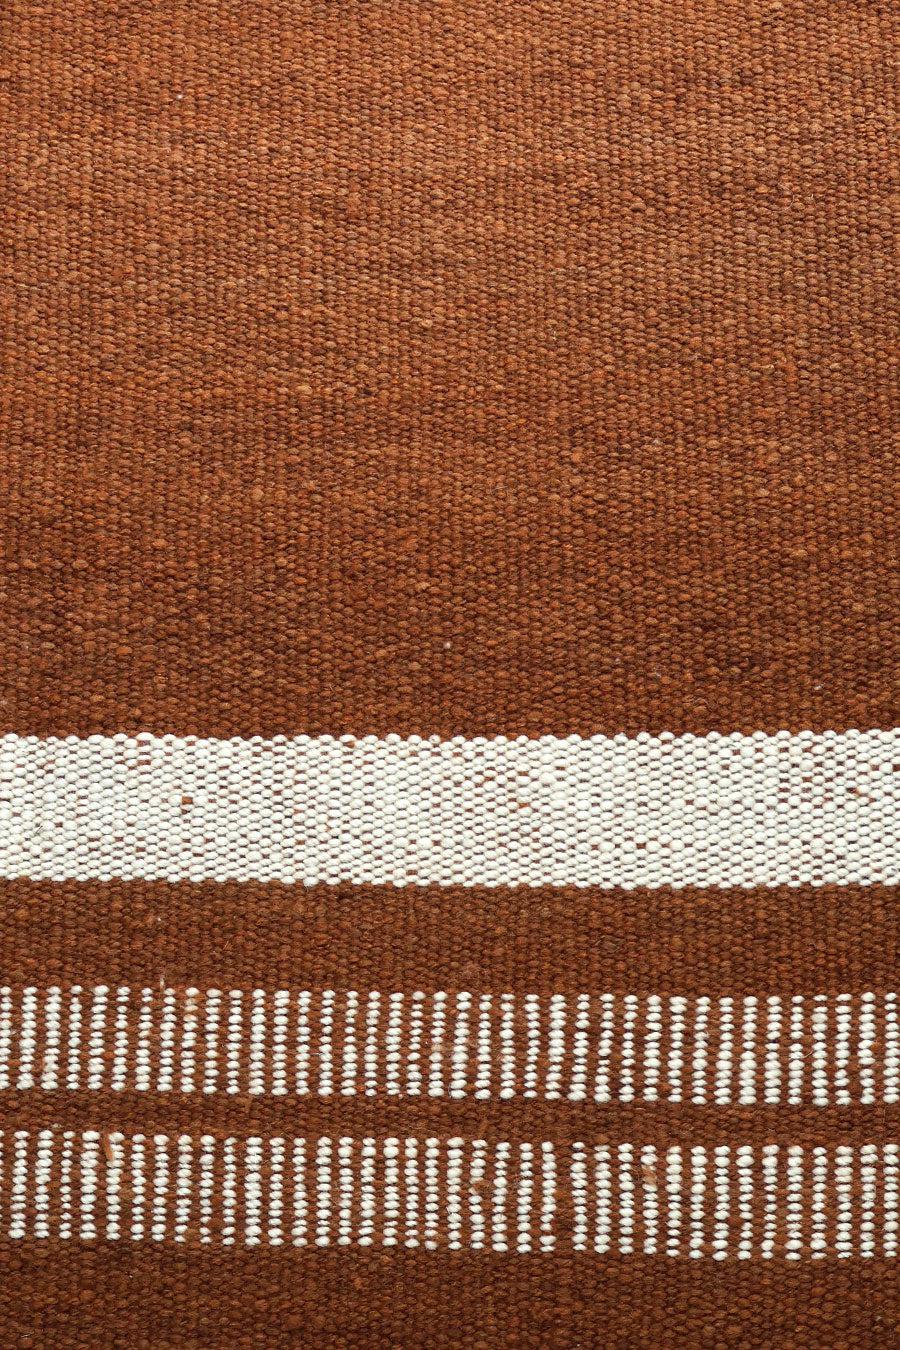 PLENA RUG | RUNNER #10 RUST & NATURAL-The Andes Project